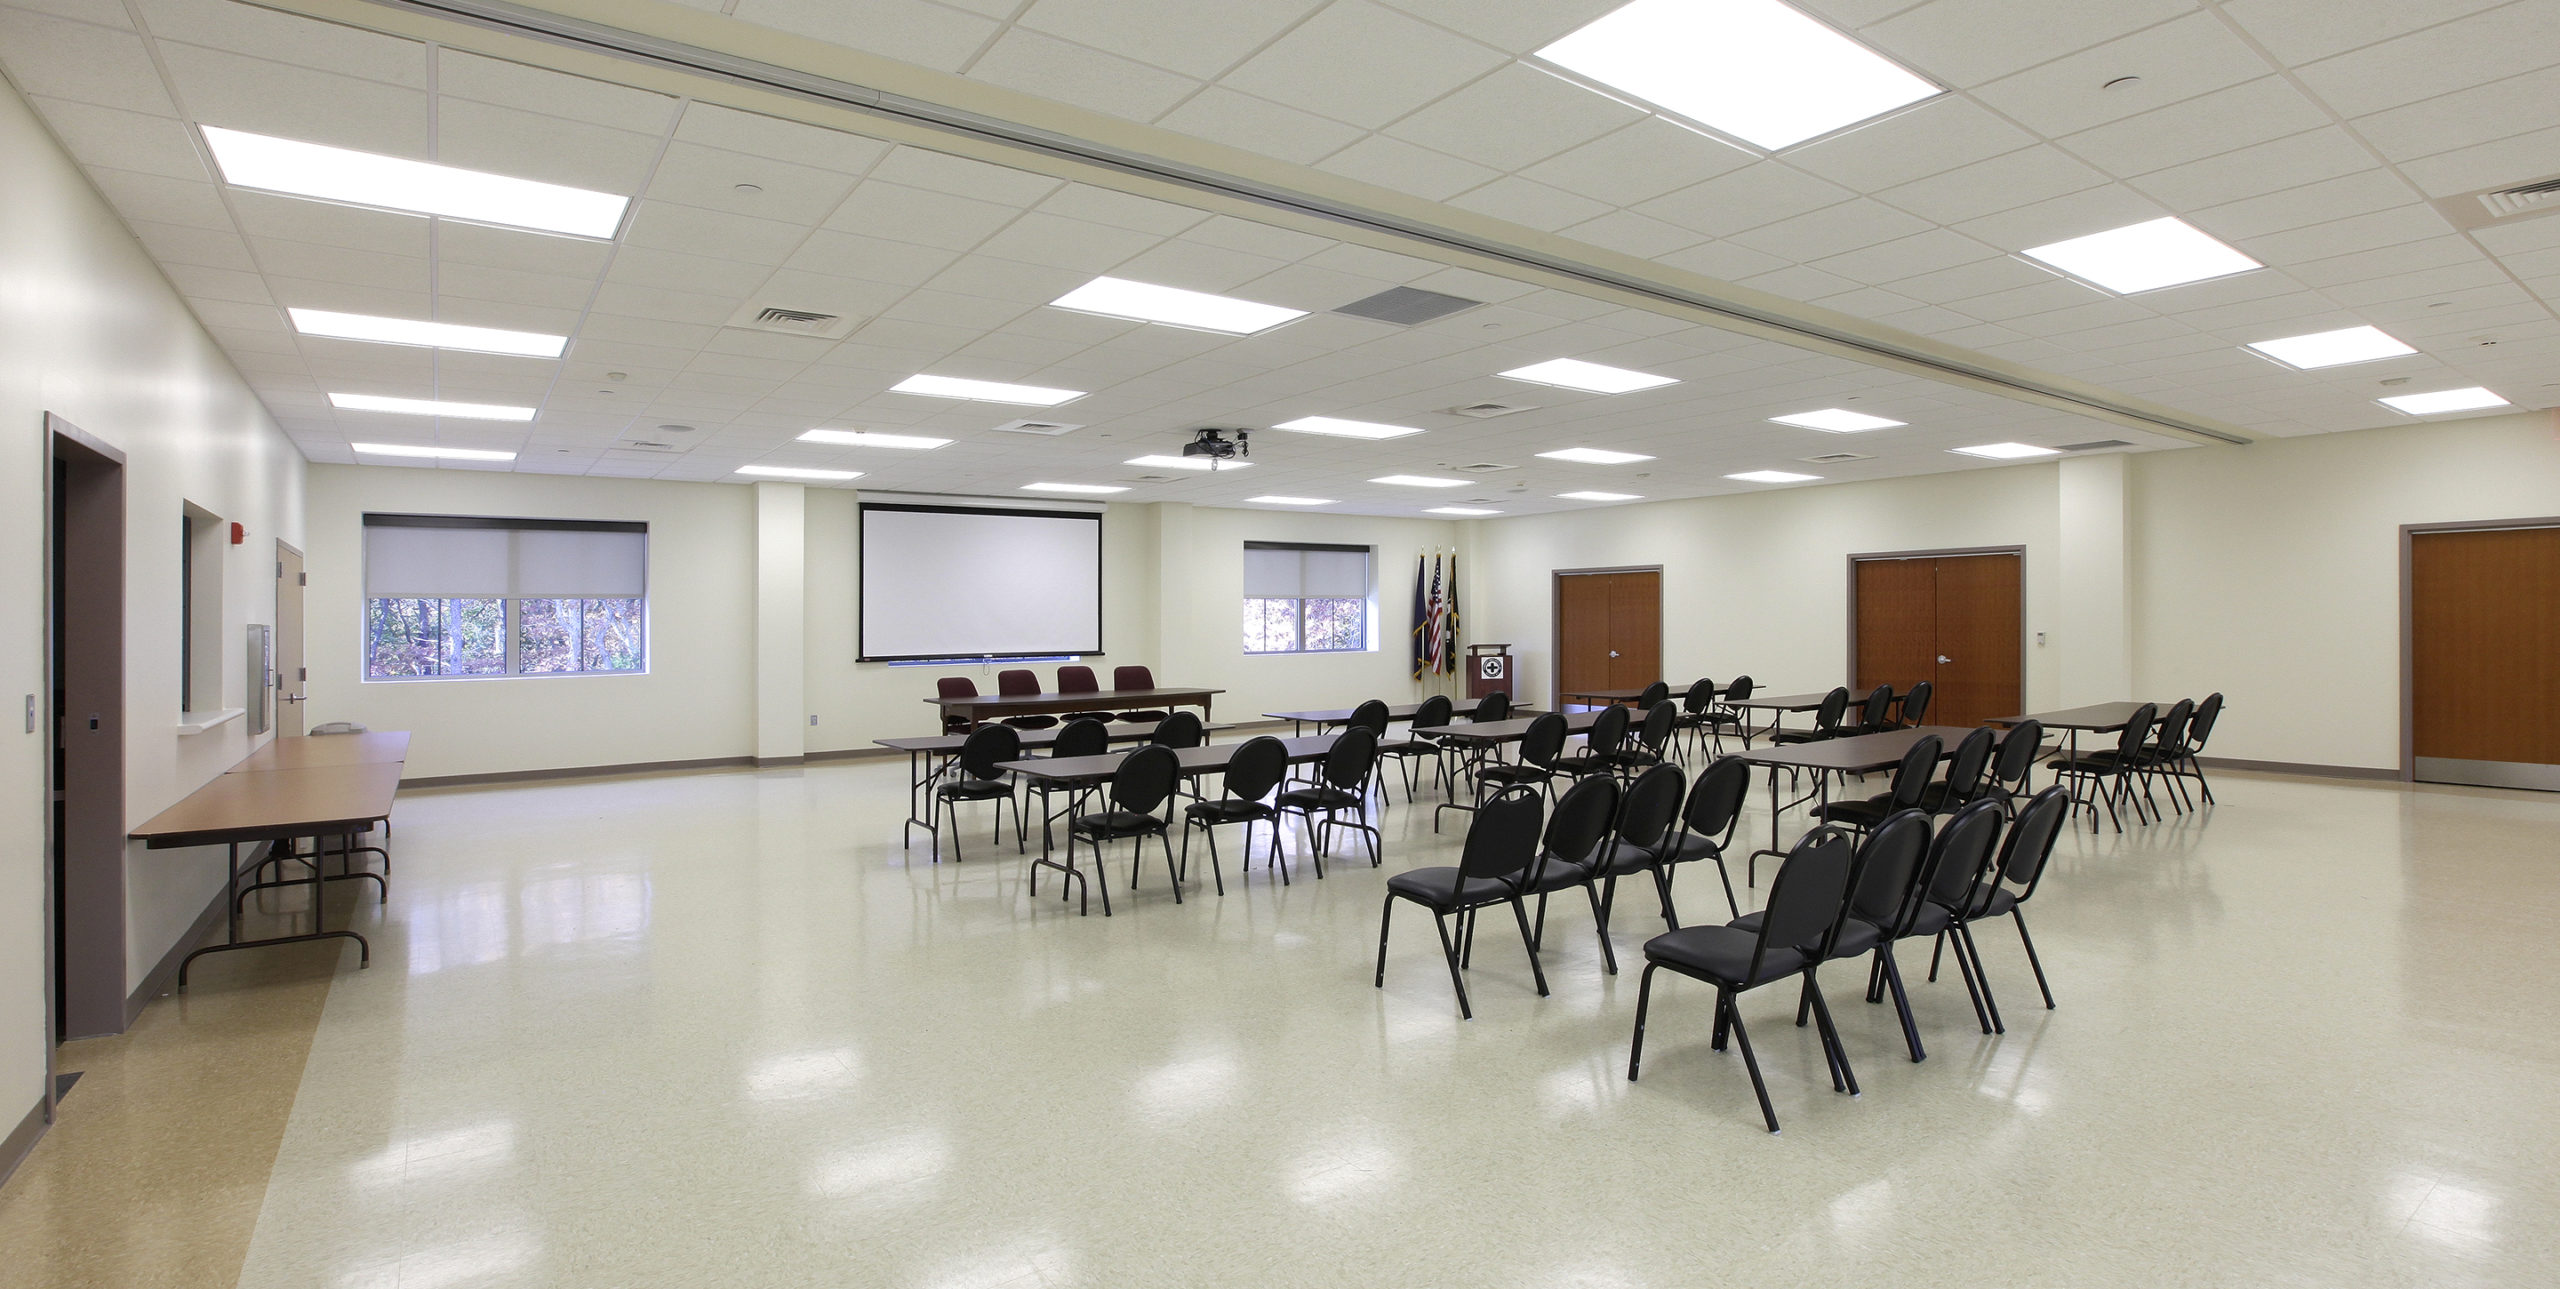 Conference room at Community Ambulance of Sayville